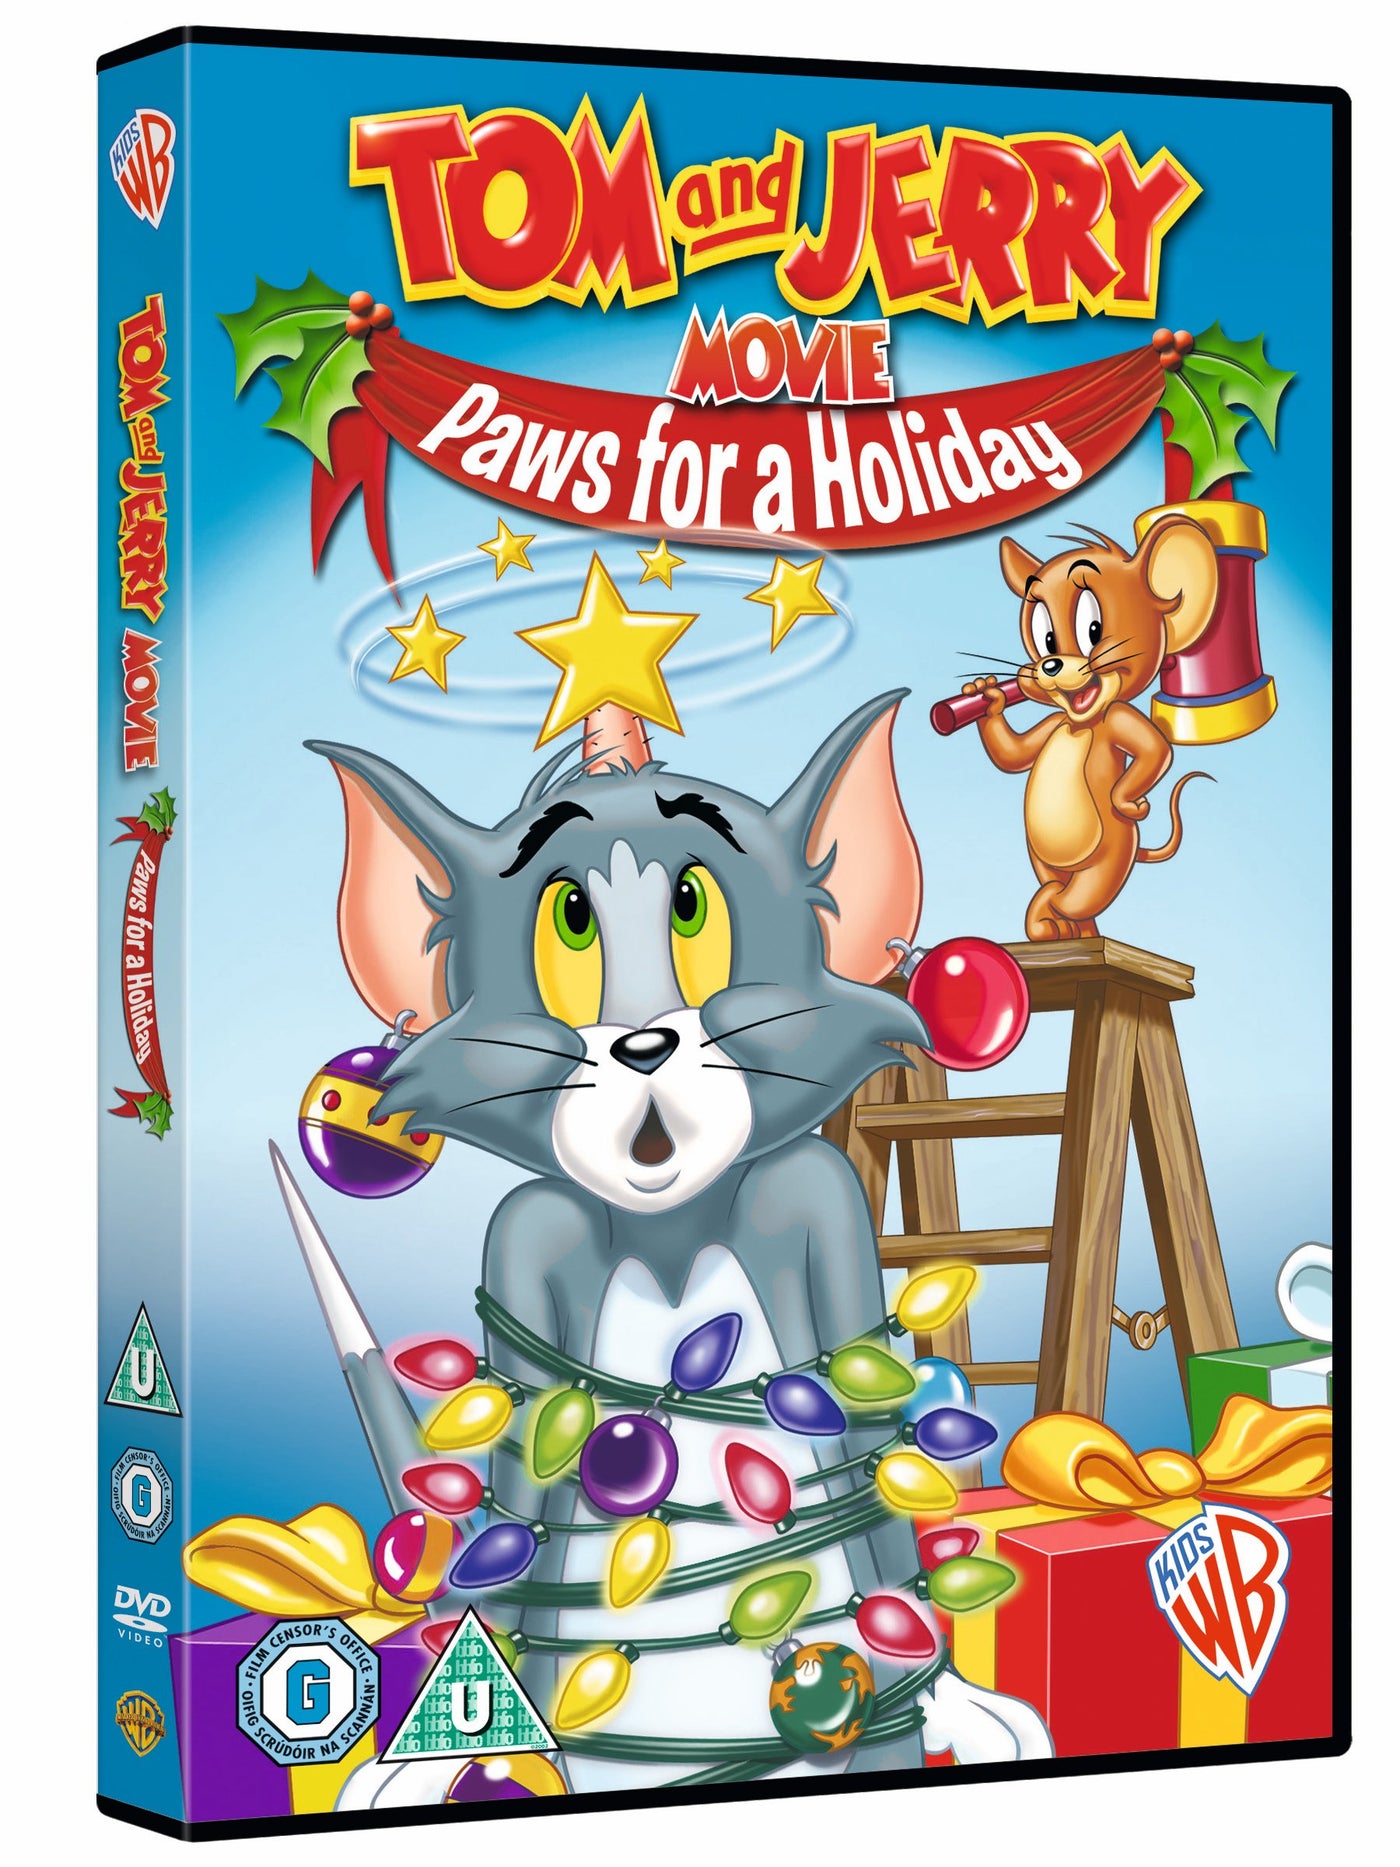 Tom And Jerry's Christmas: Paws For A Holiday [2003] (DVD)